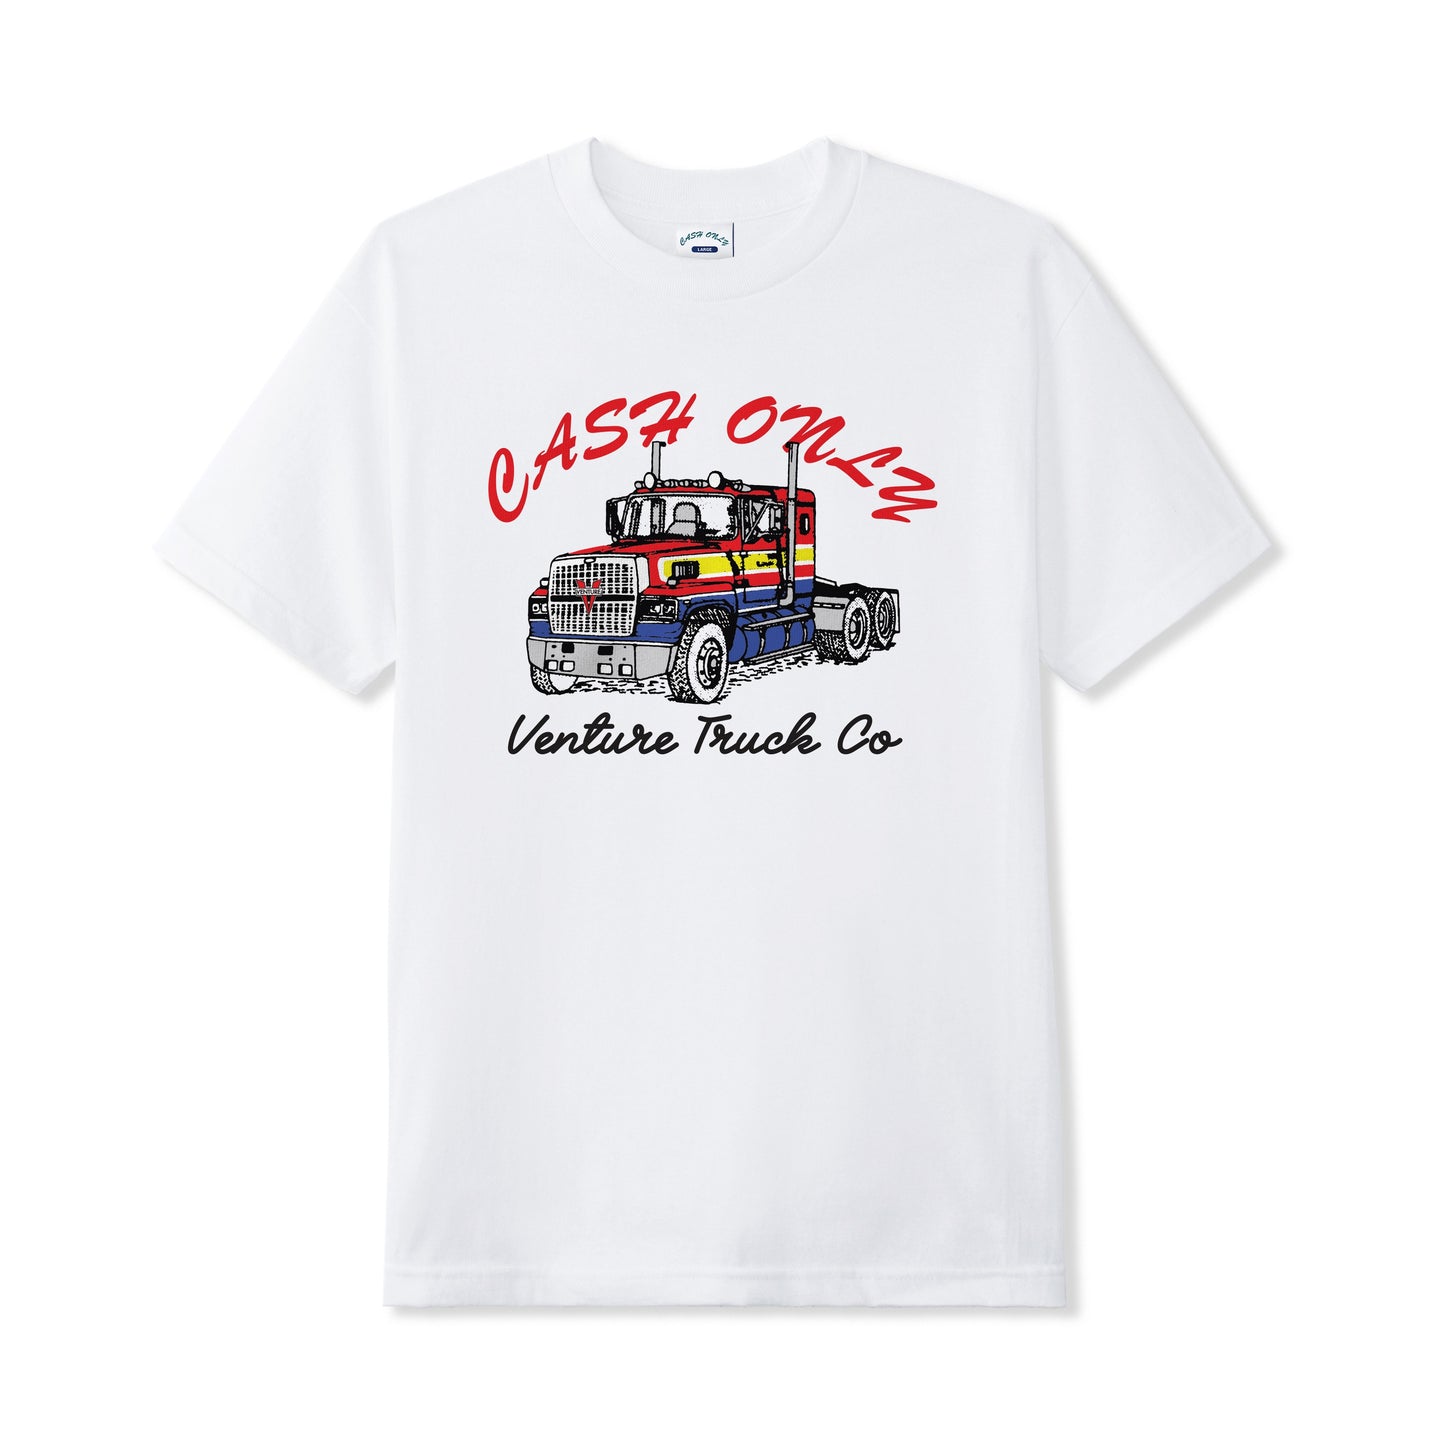 Cash Only x Venture Truck Tee - White